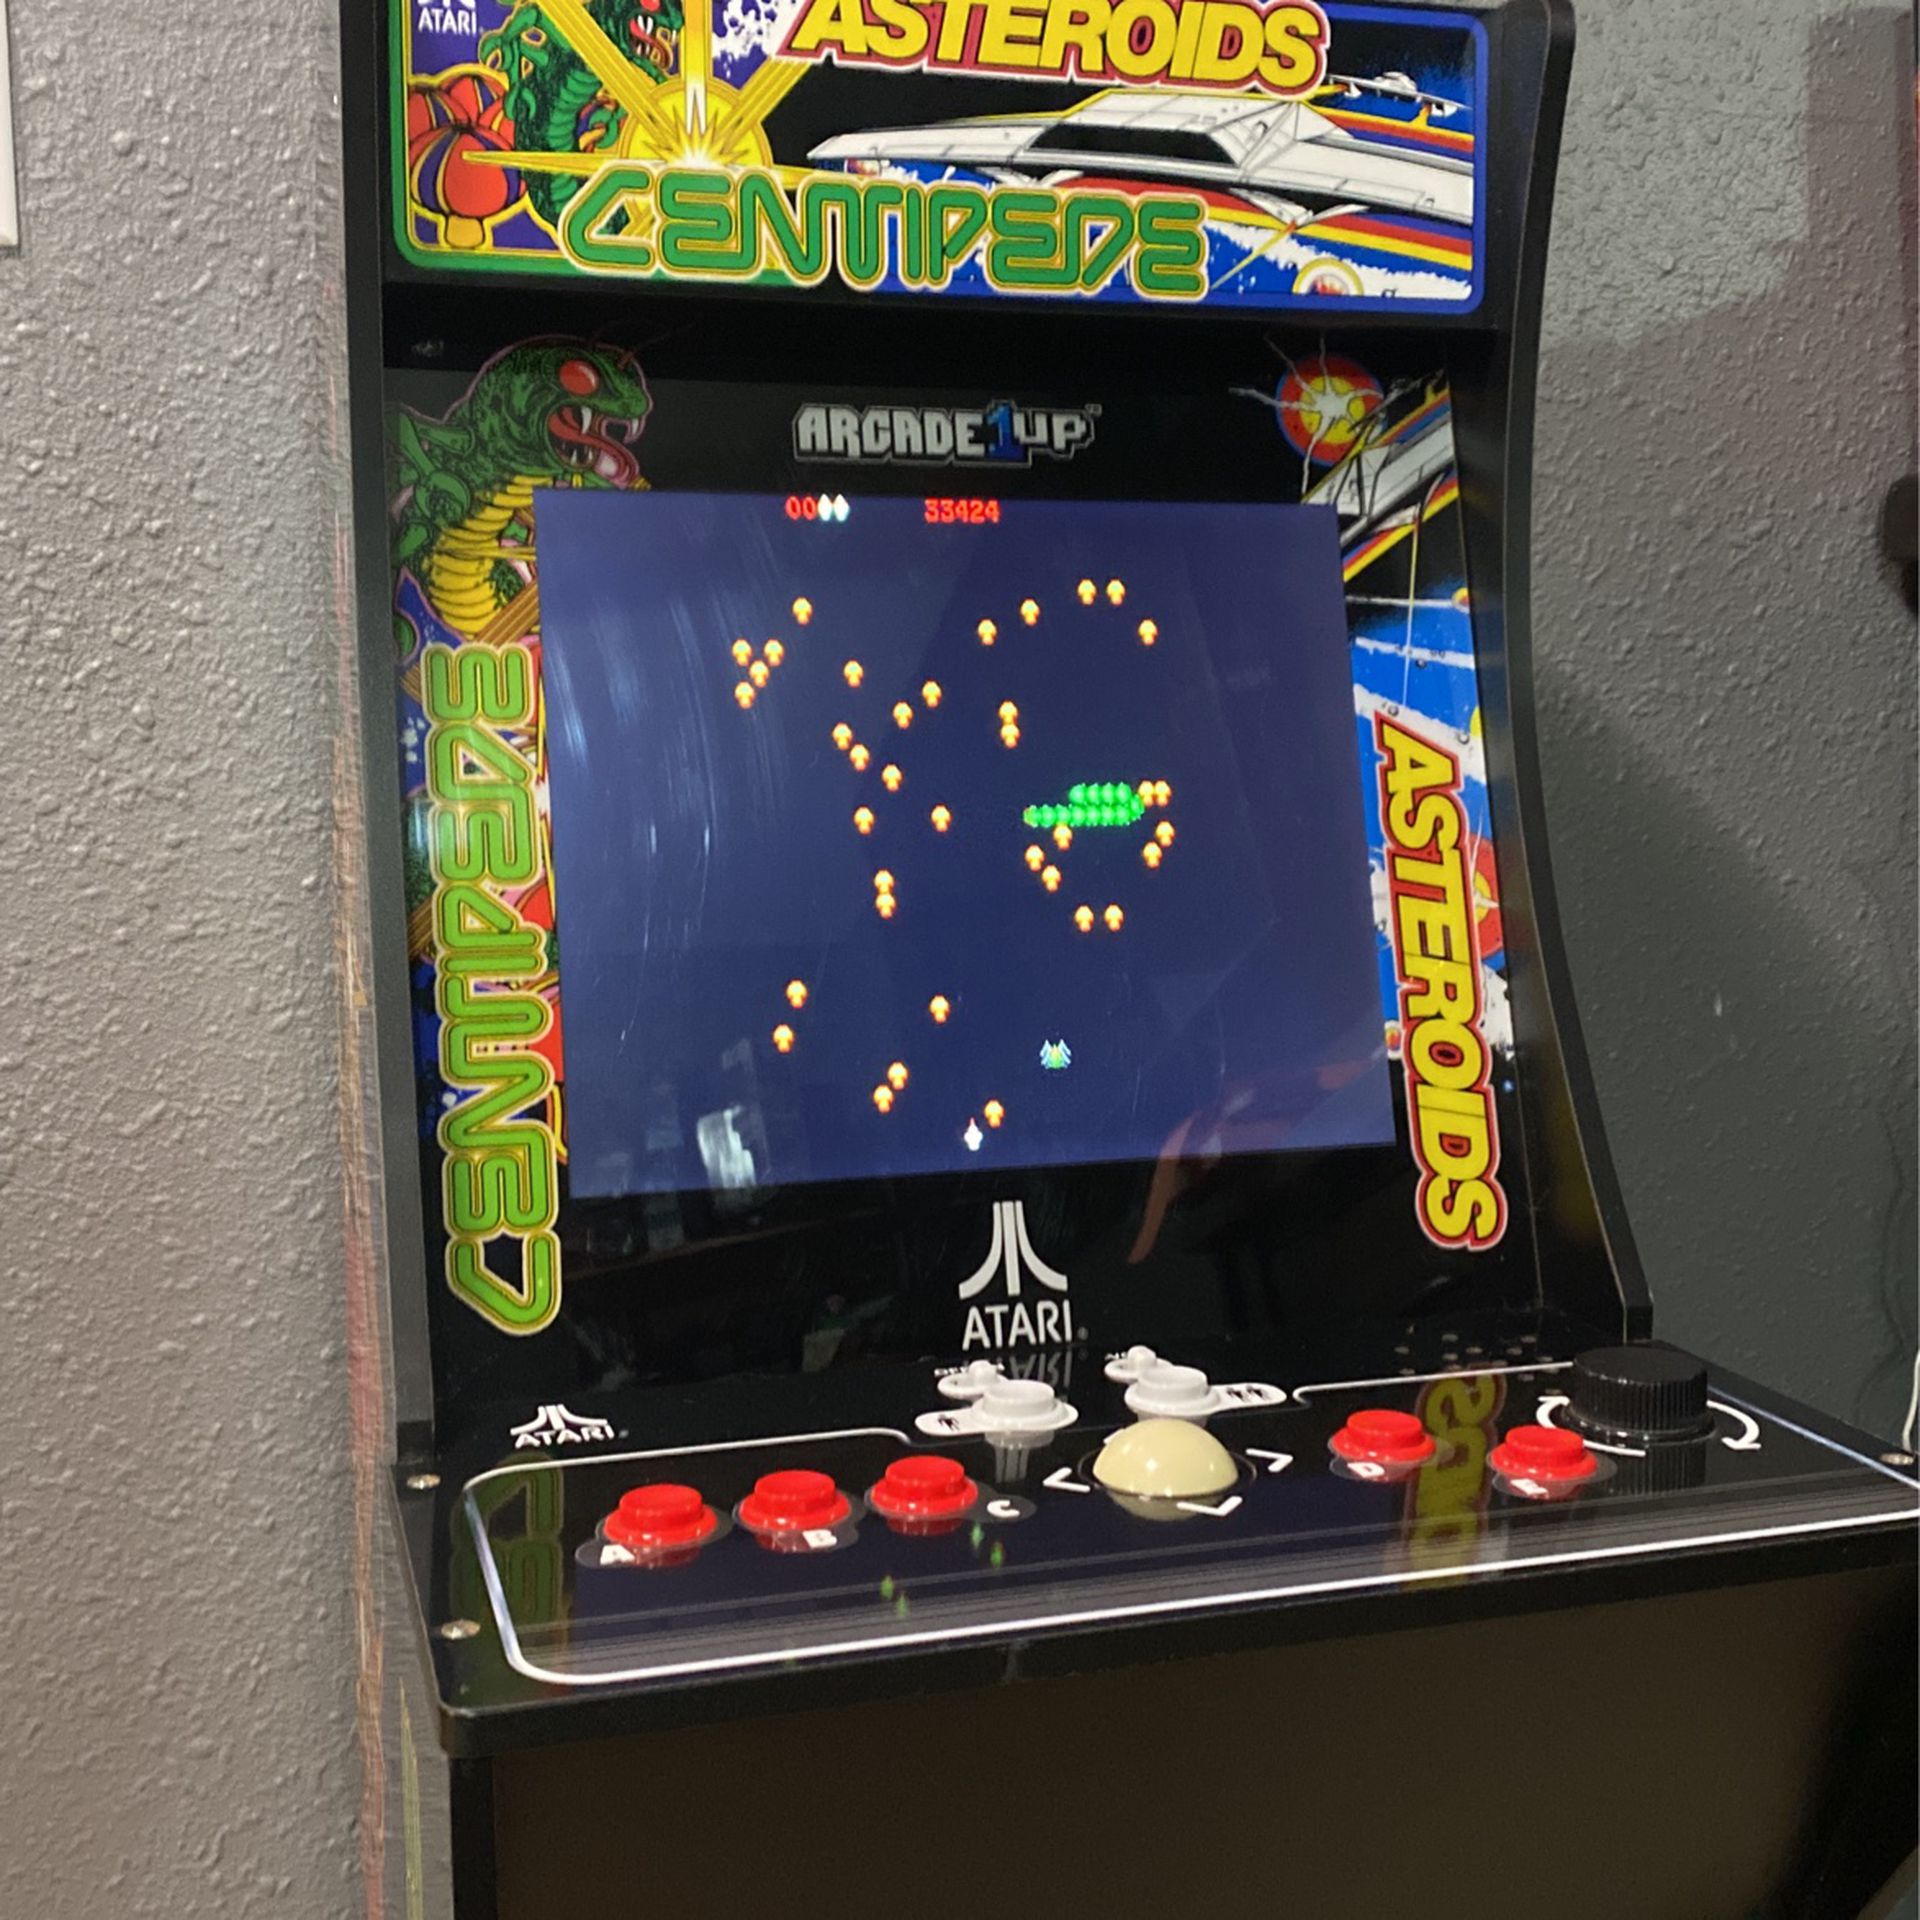 Arcade 1Up - Asteroids,Centipede, Missile Command